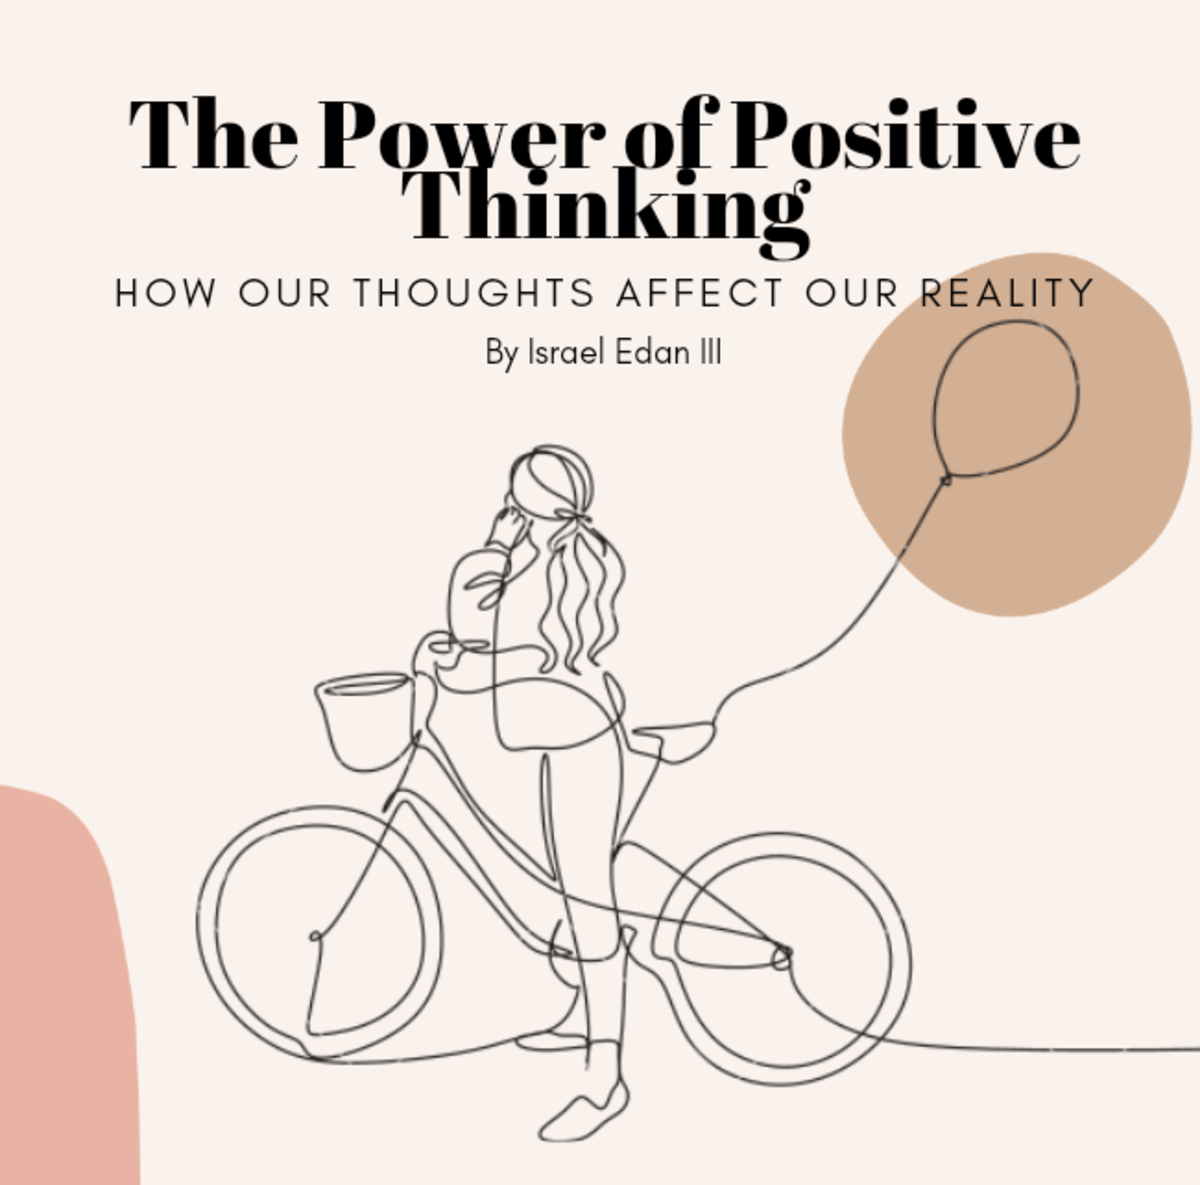 The Power of Positive Thinking: How Our Thoughts Affect Our Reality